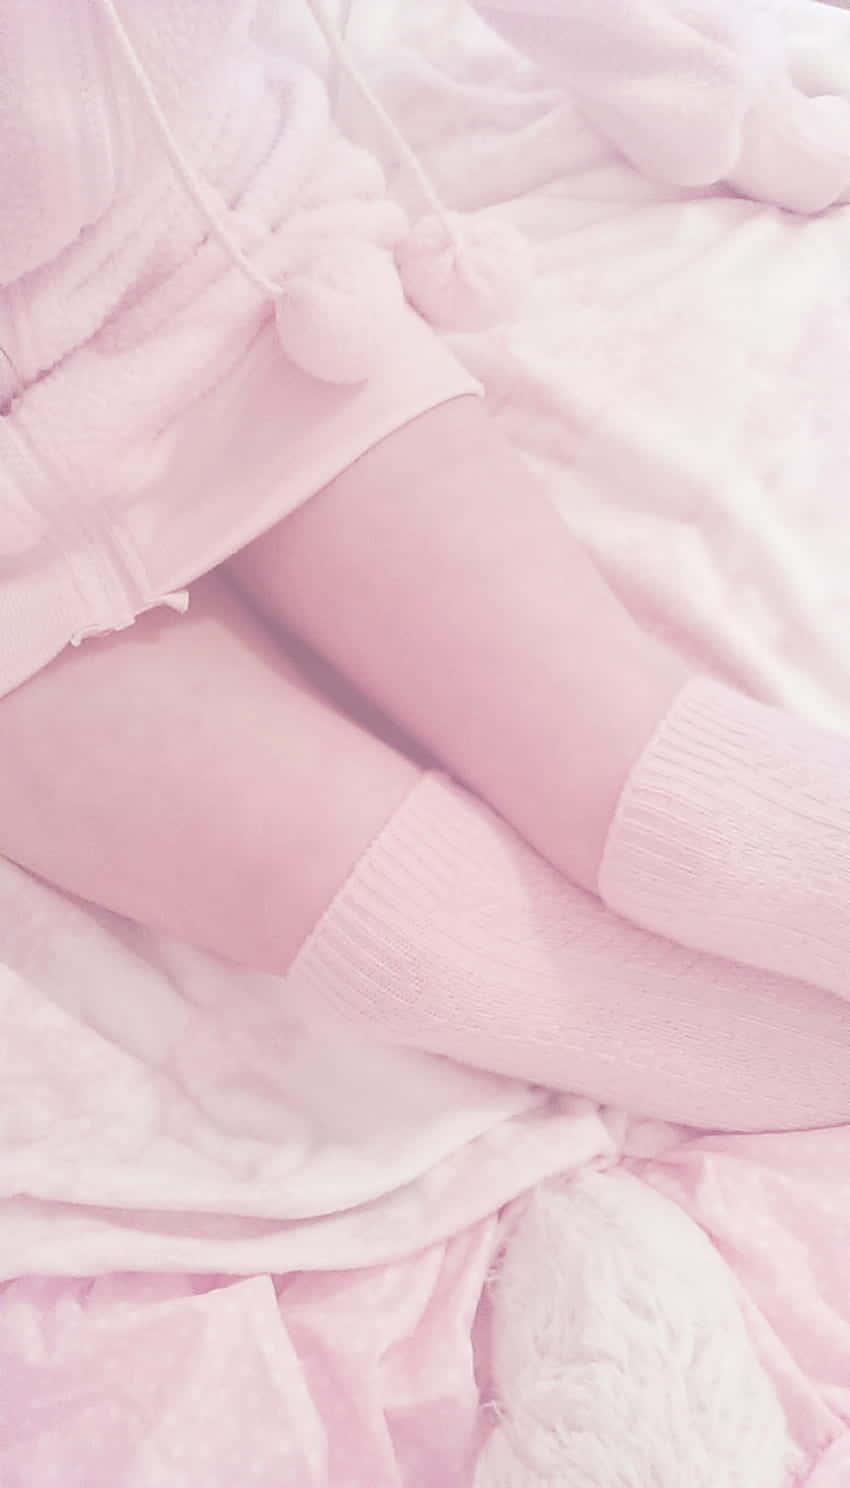 Soft Pink Comfort_ Socks And Sweater Wallpaper